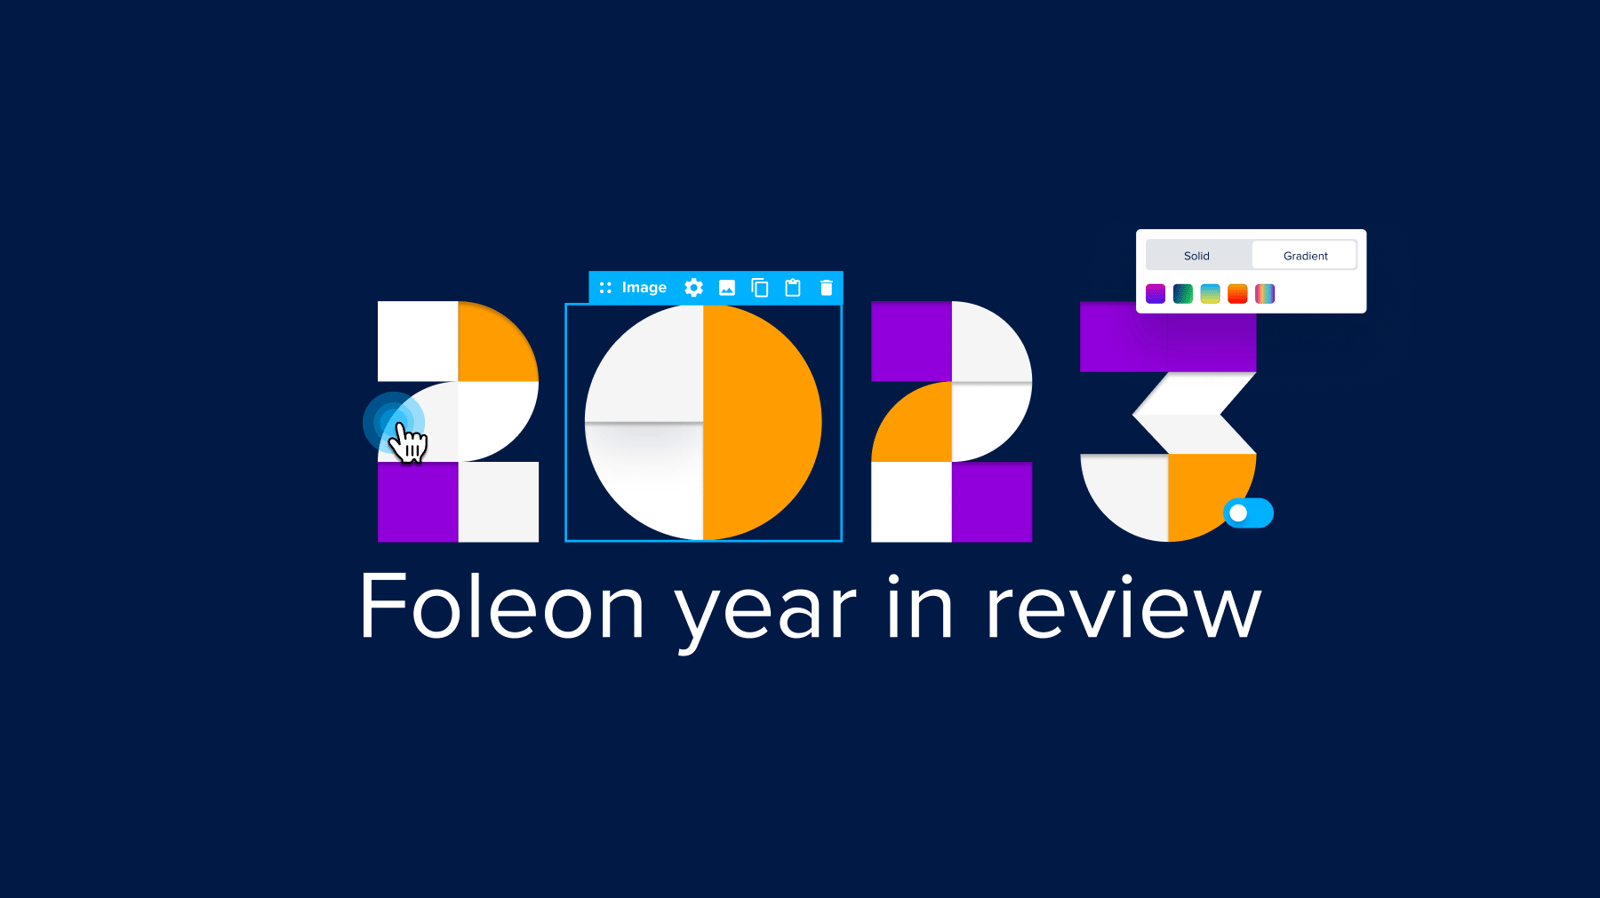 Behind the Scenes: Creating Foleon's 2023 Year-in-Review